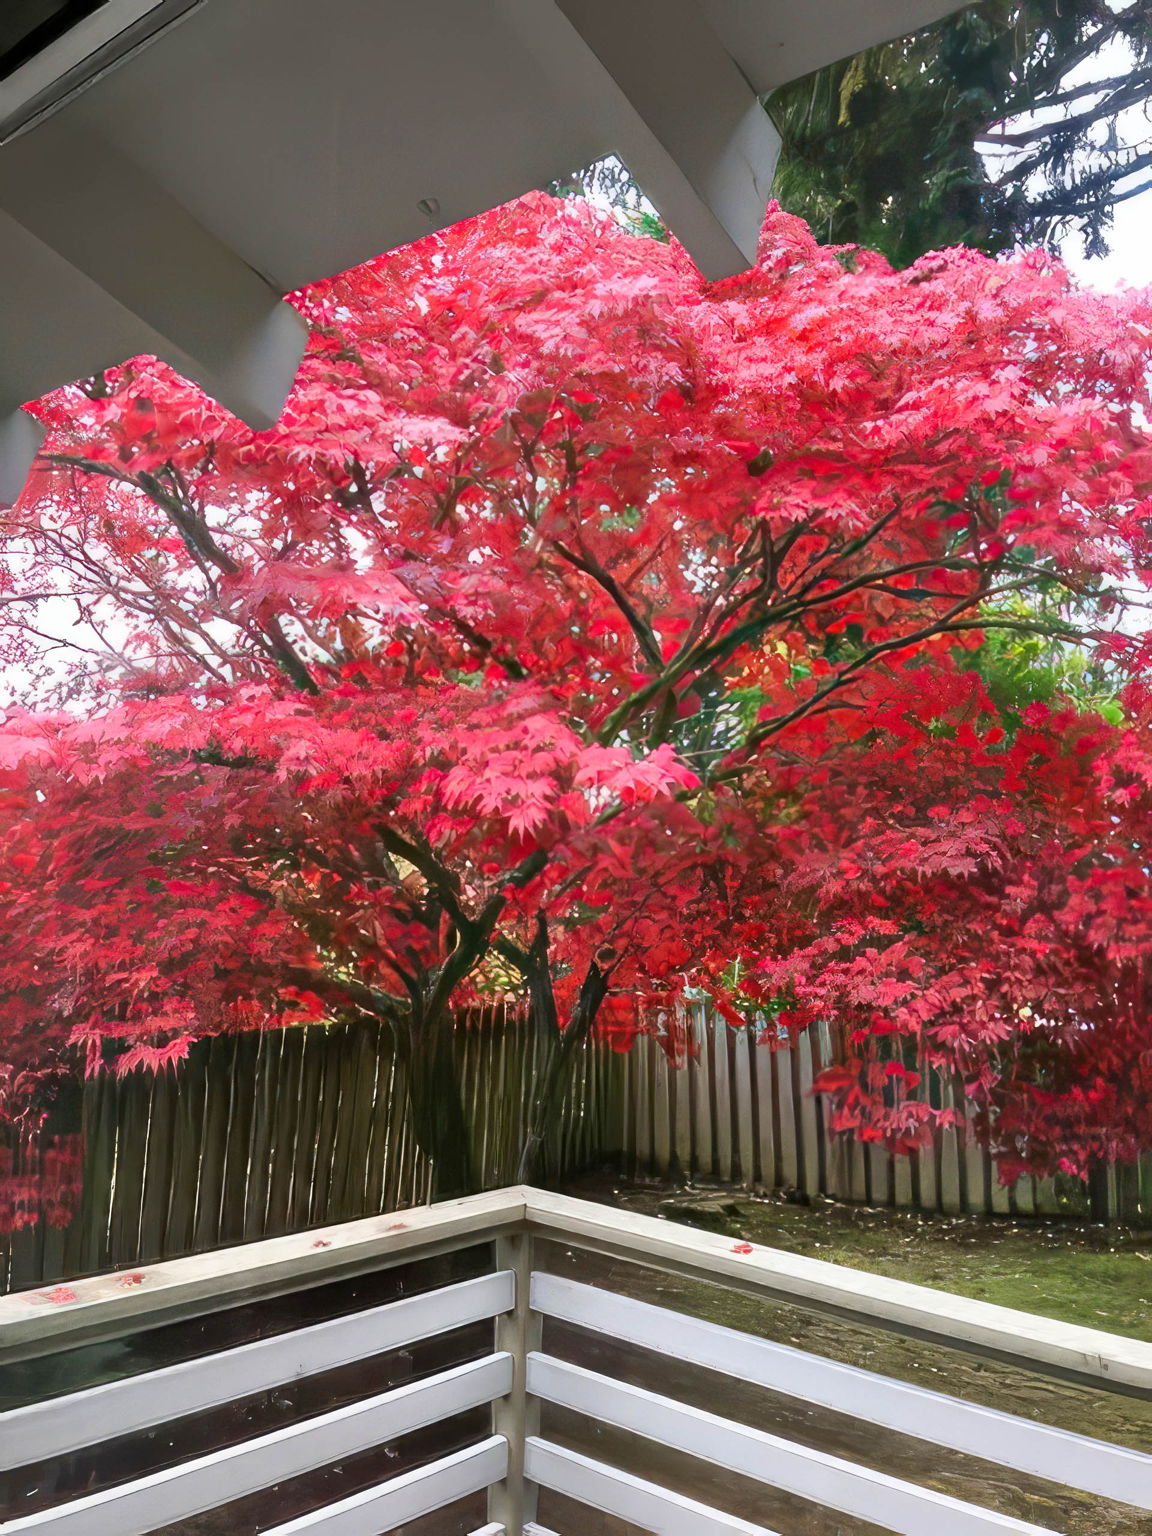 One of the maples in the backyard stands out with its majestic size and maturity. It is a rare and splendid sight to behold such an established and magnificent Japanese maple in this day and age.